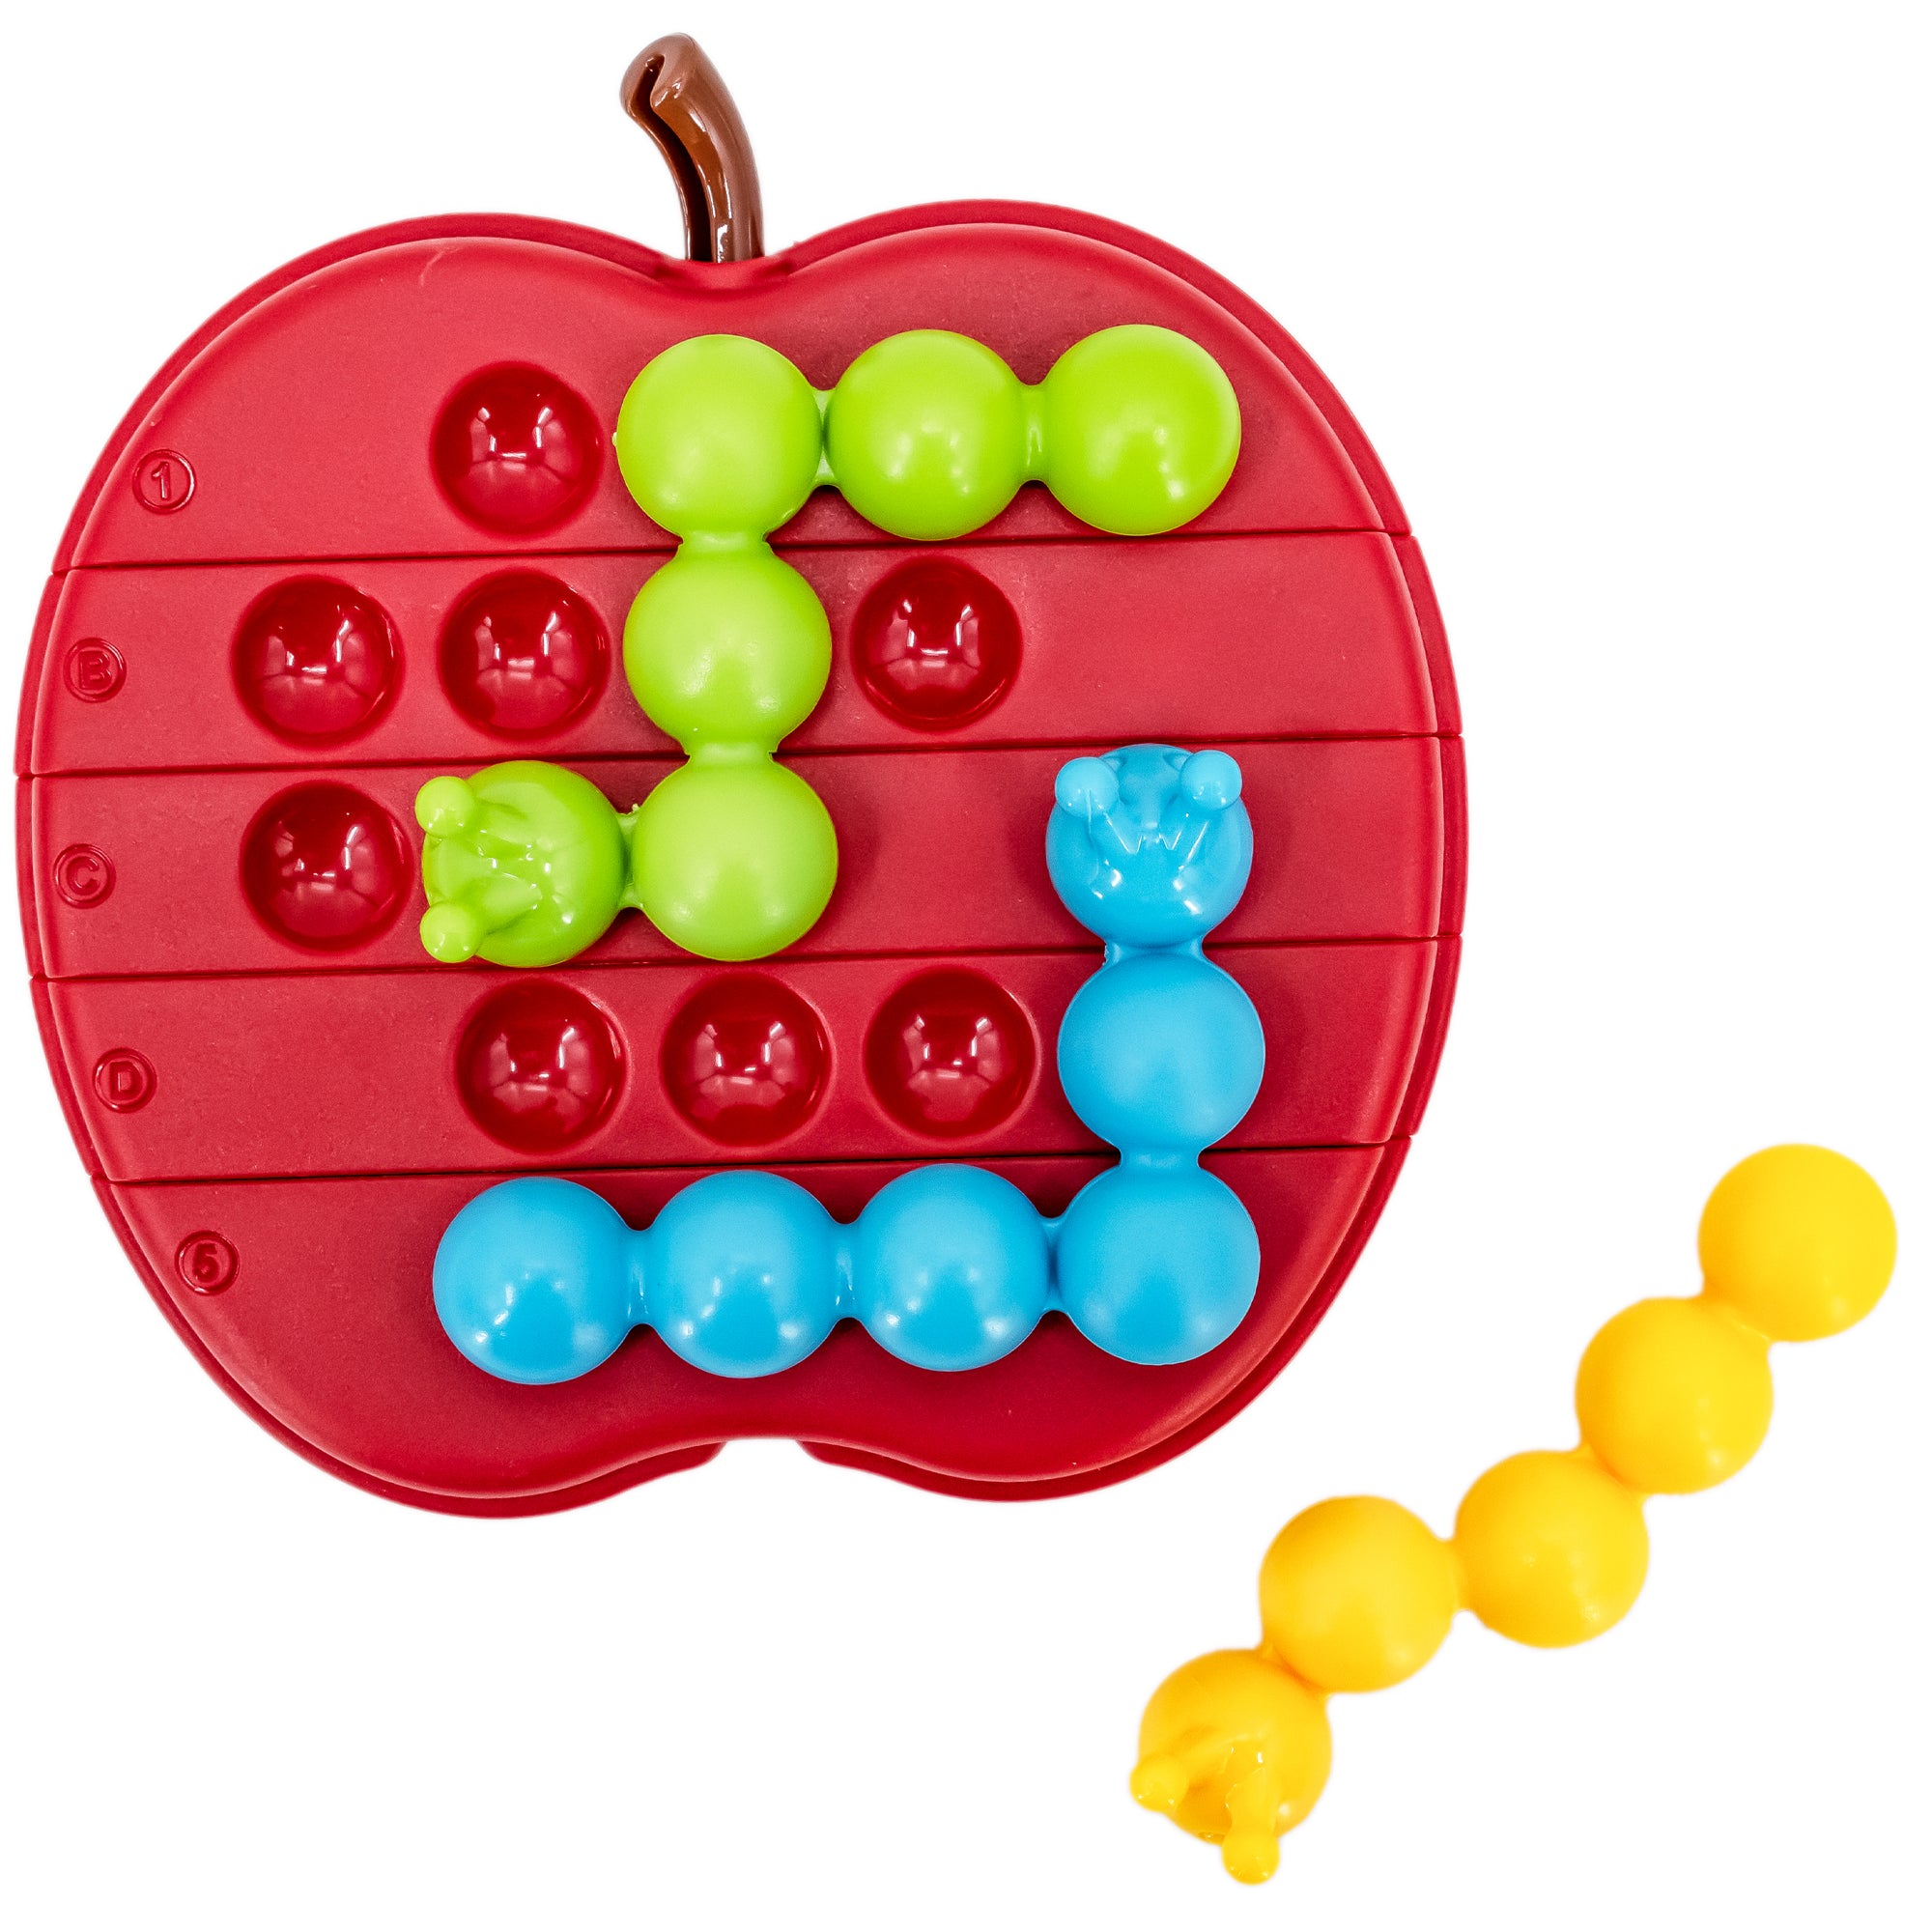 Apple TwistSmart Toys and Games – Watch Me Grow